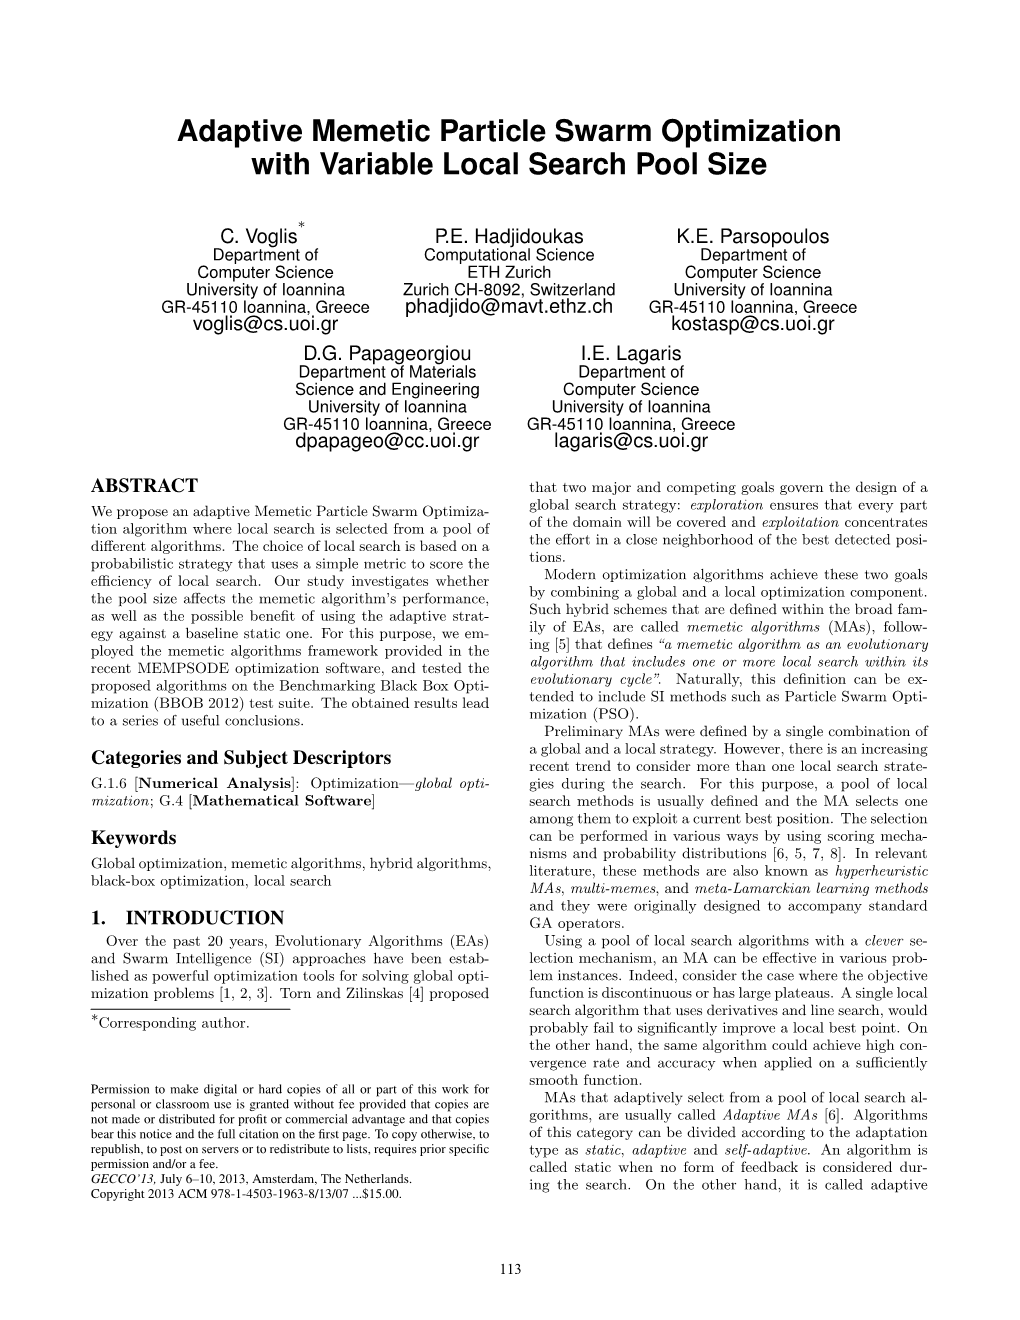 Adaptive Memetic Particle Swarm Optimization with Variable Local Search Pool Size